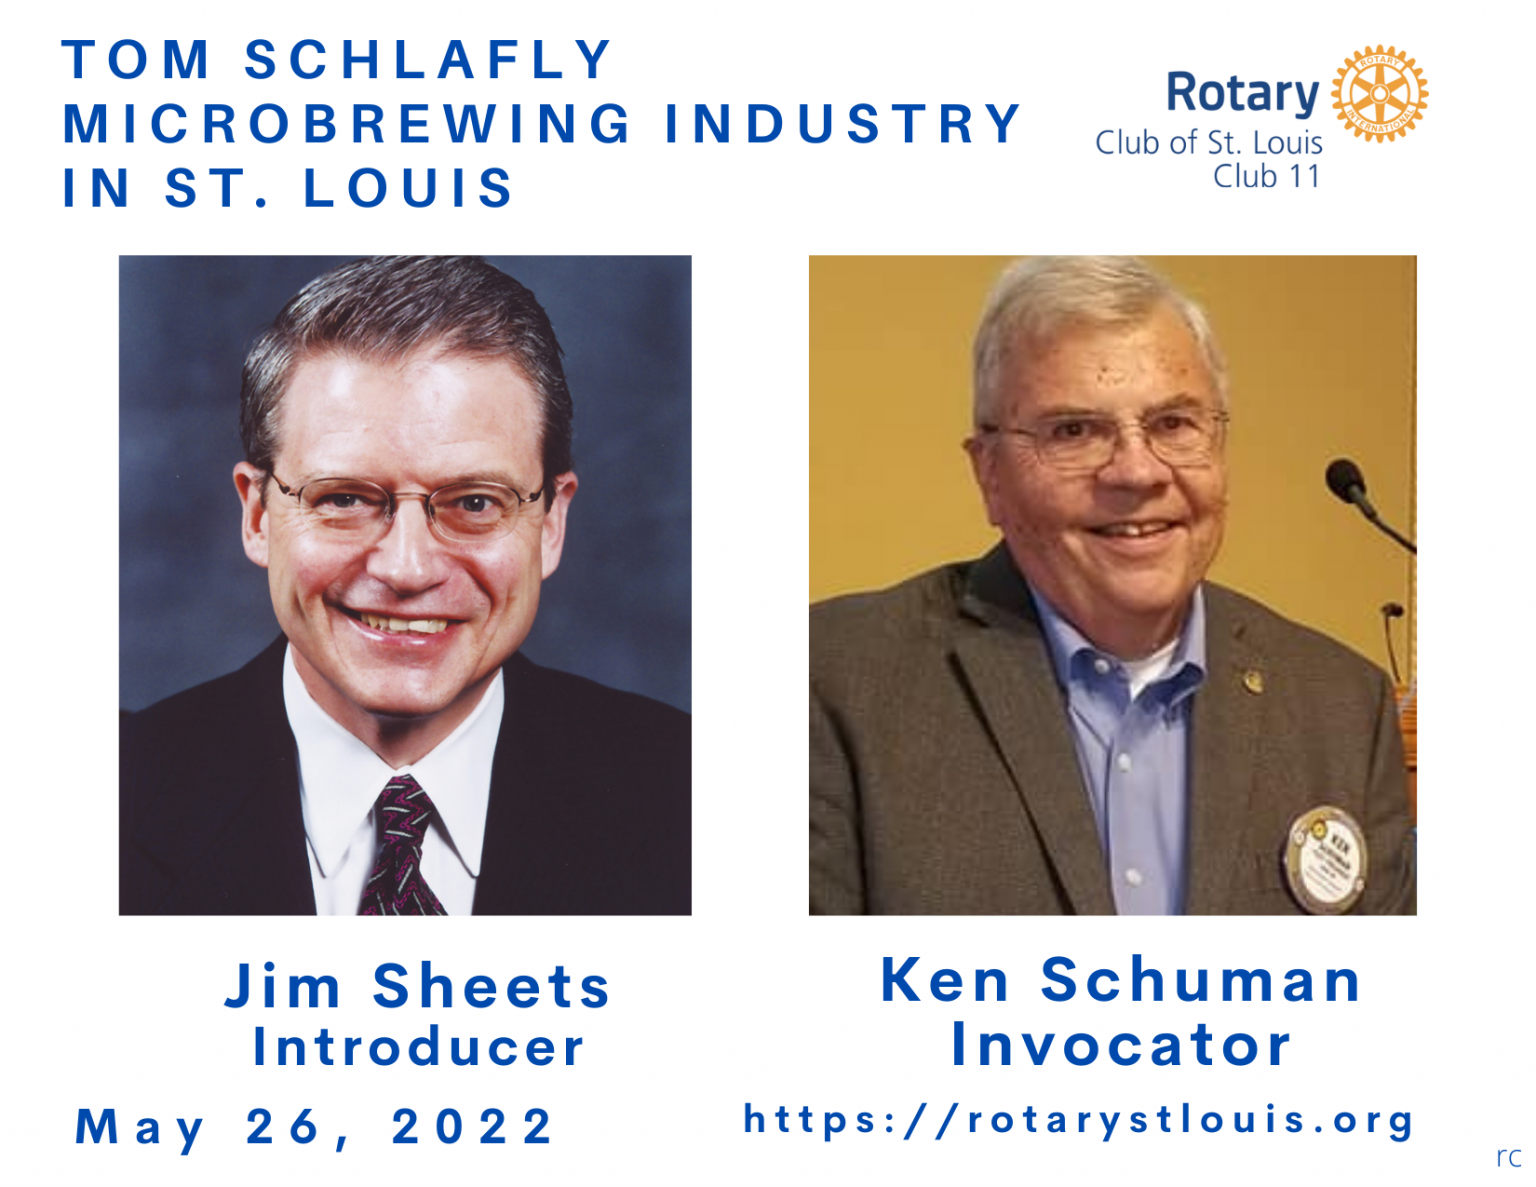 Sheets, Introducer and Schuman, Invocator 5-26-22 at St. Louis Rotary Club